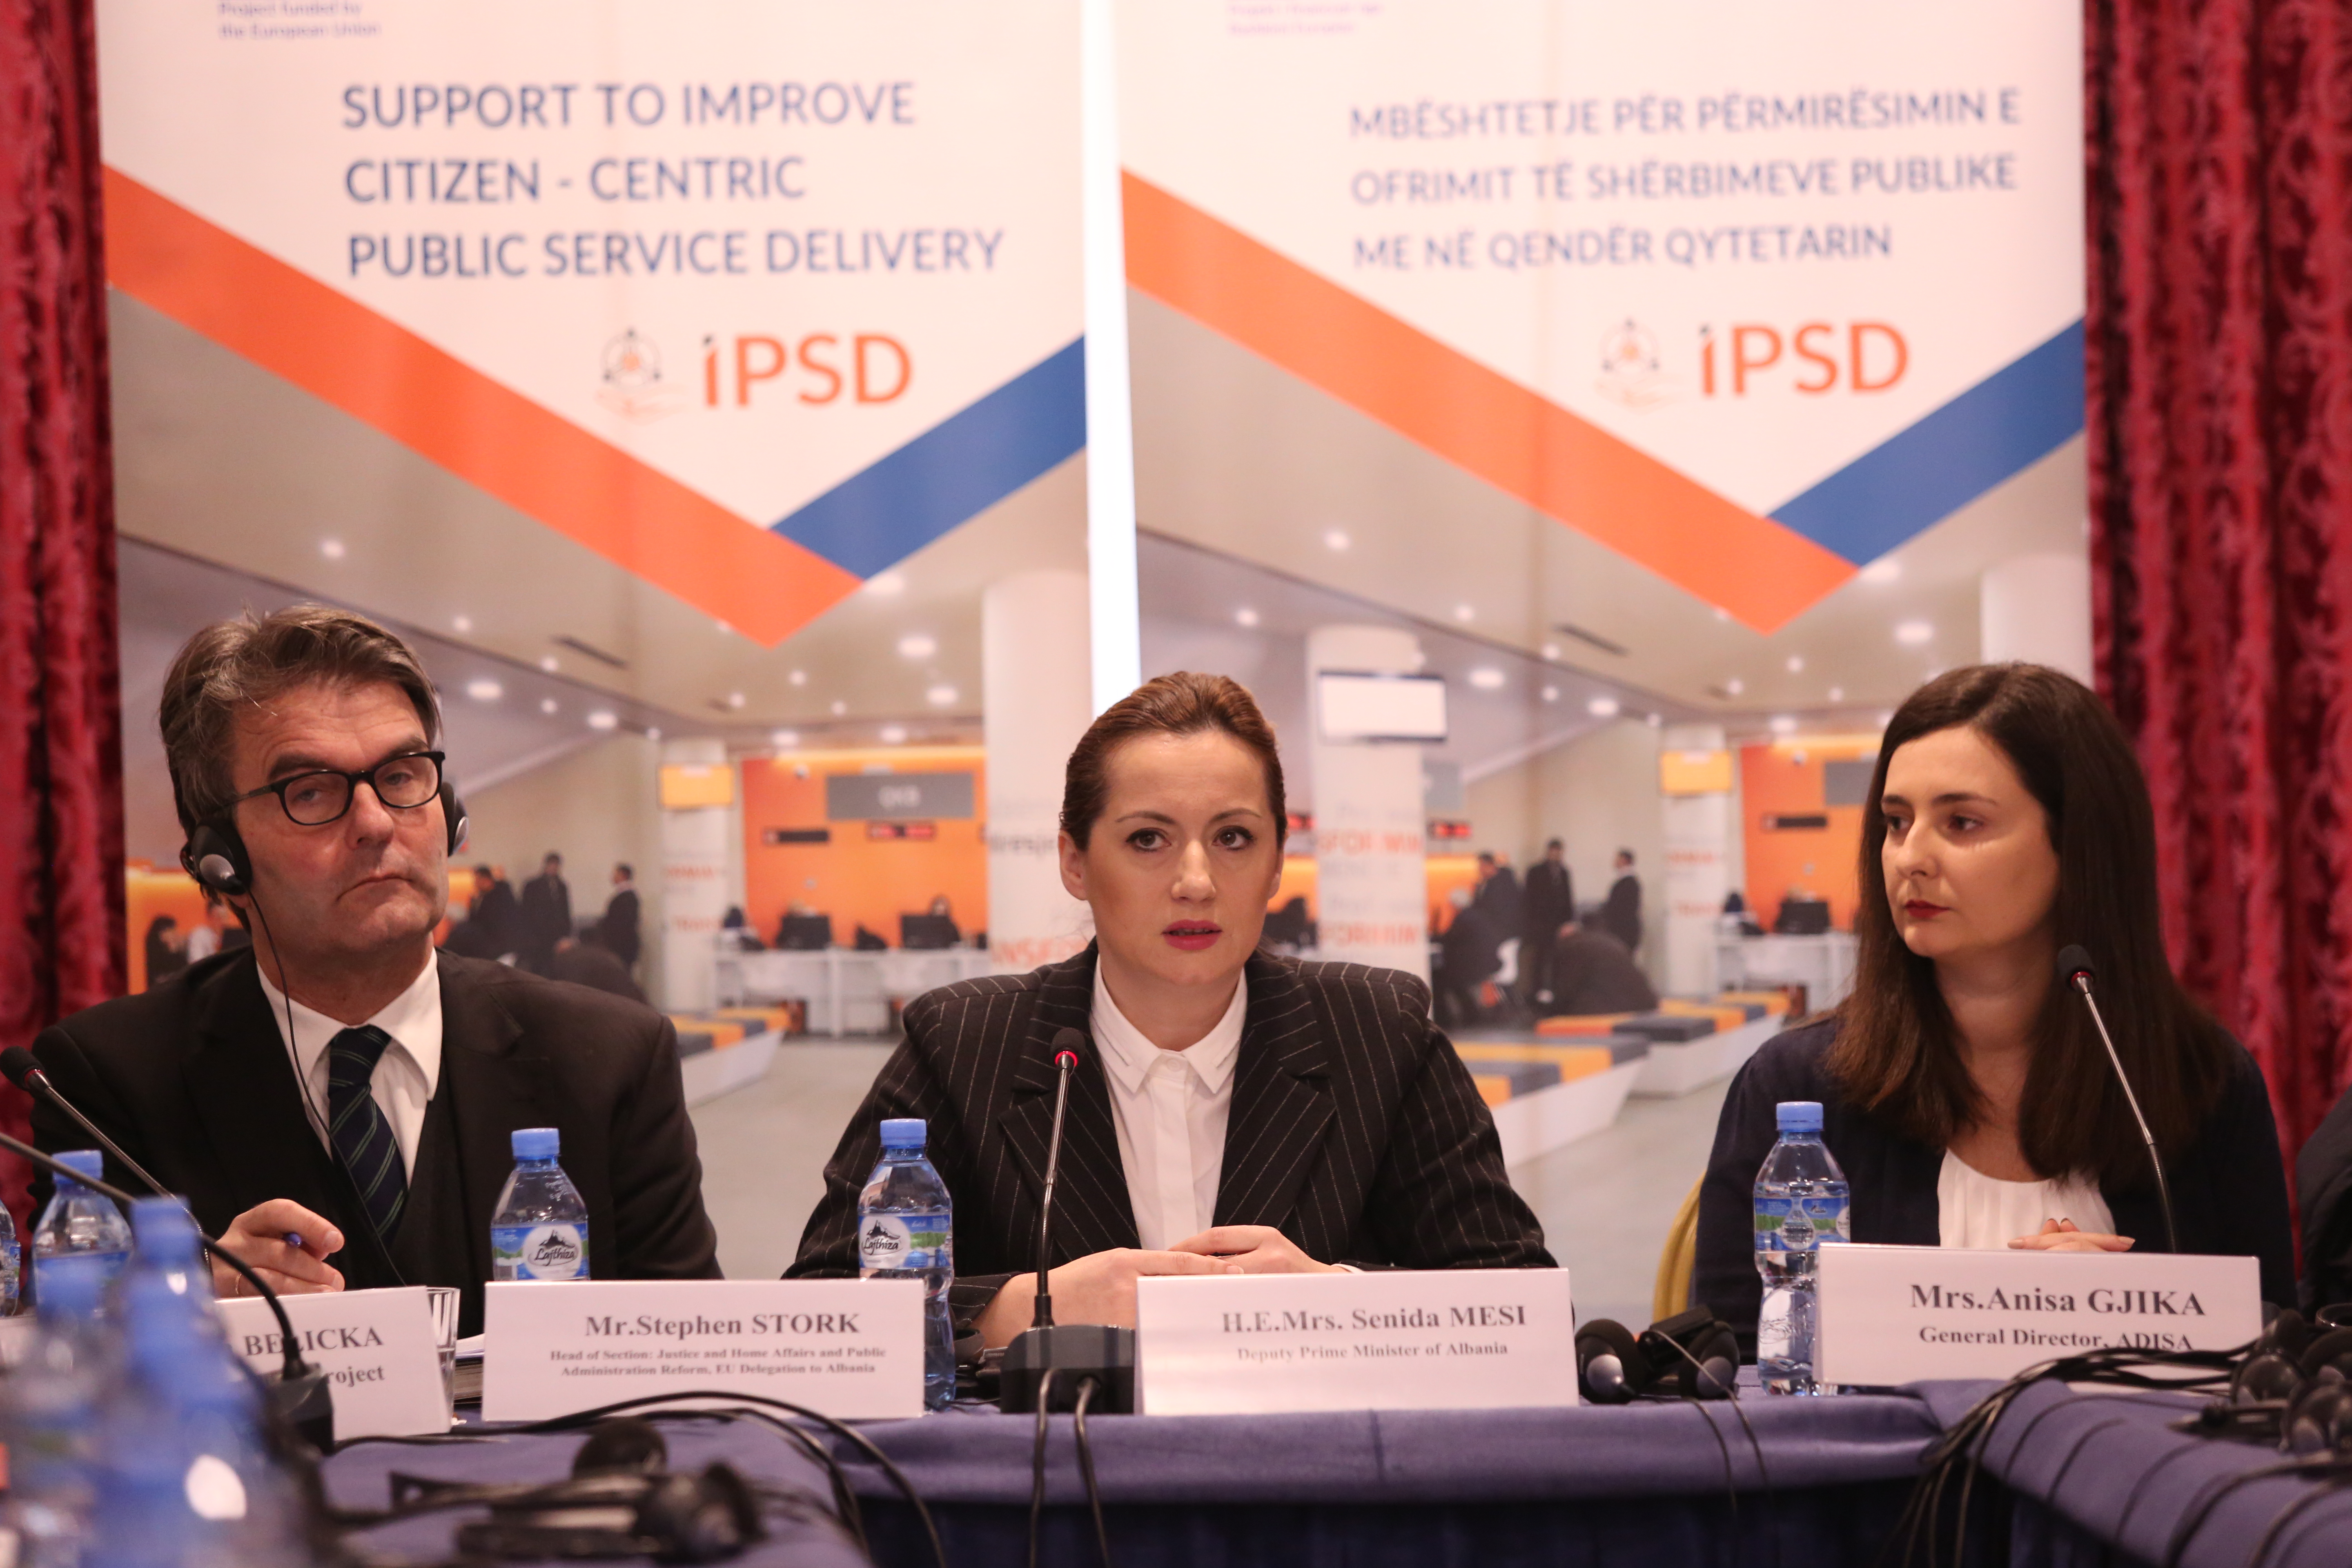 IPSD Project and ADISA, together to improve “Barrier- Free Services”for people with special needs